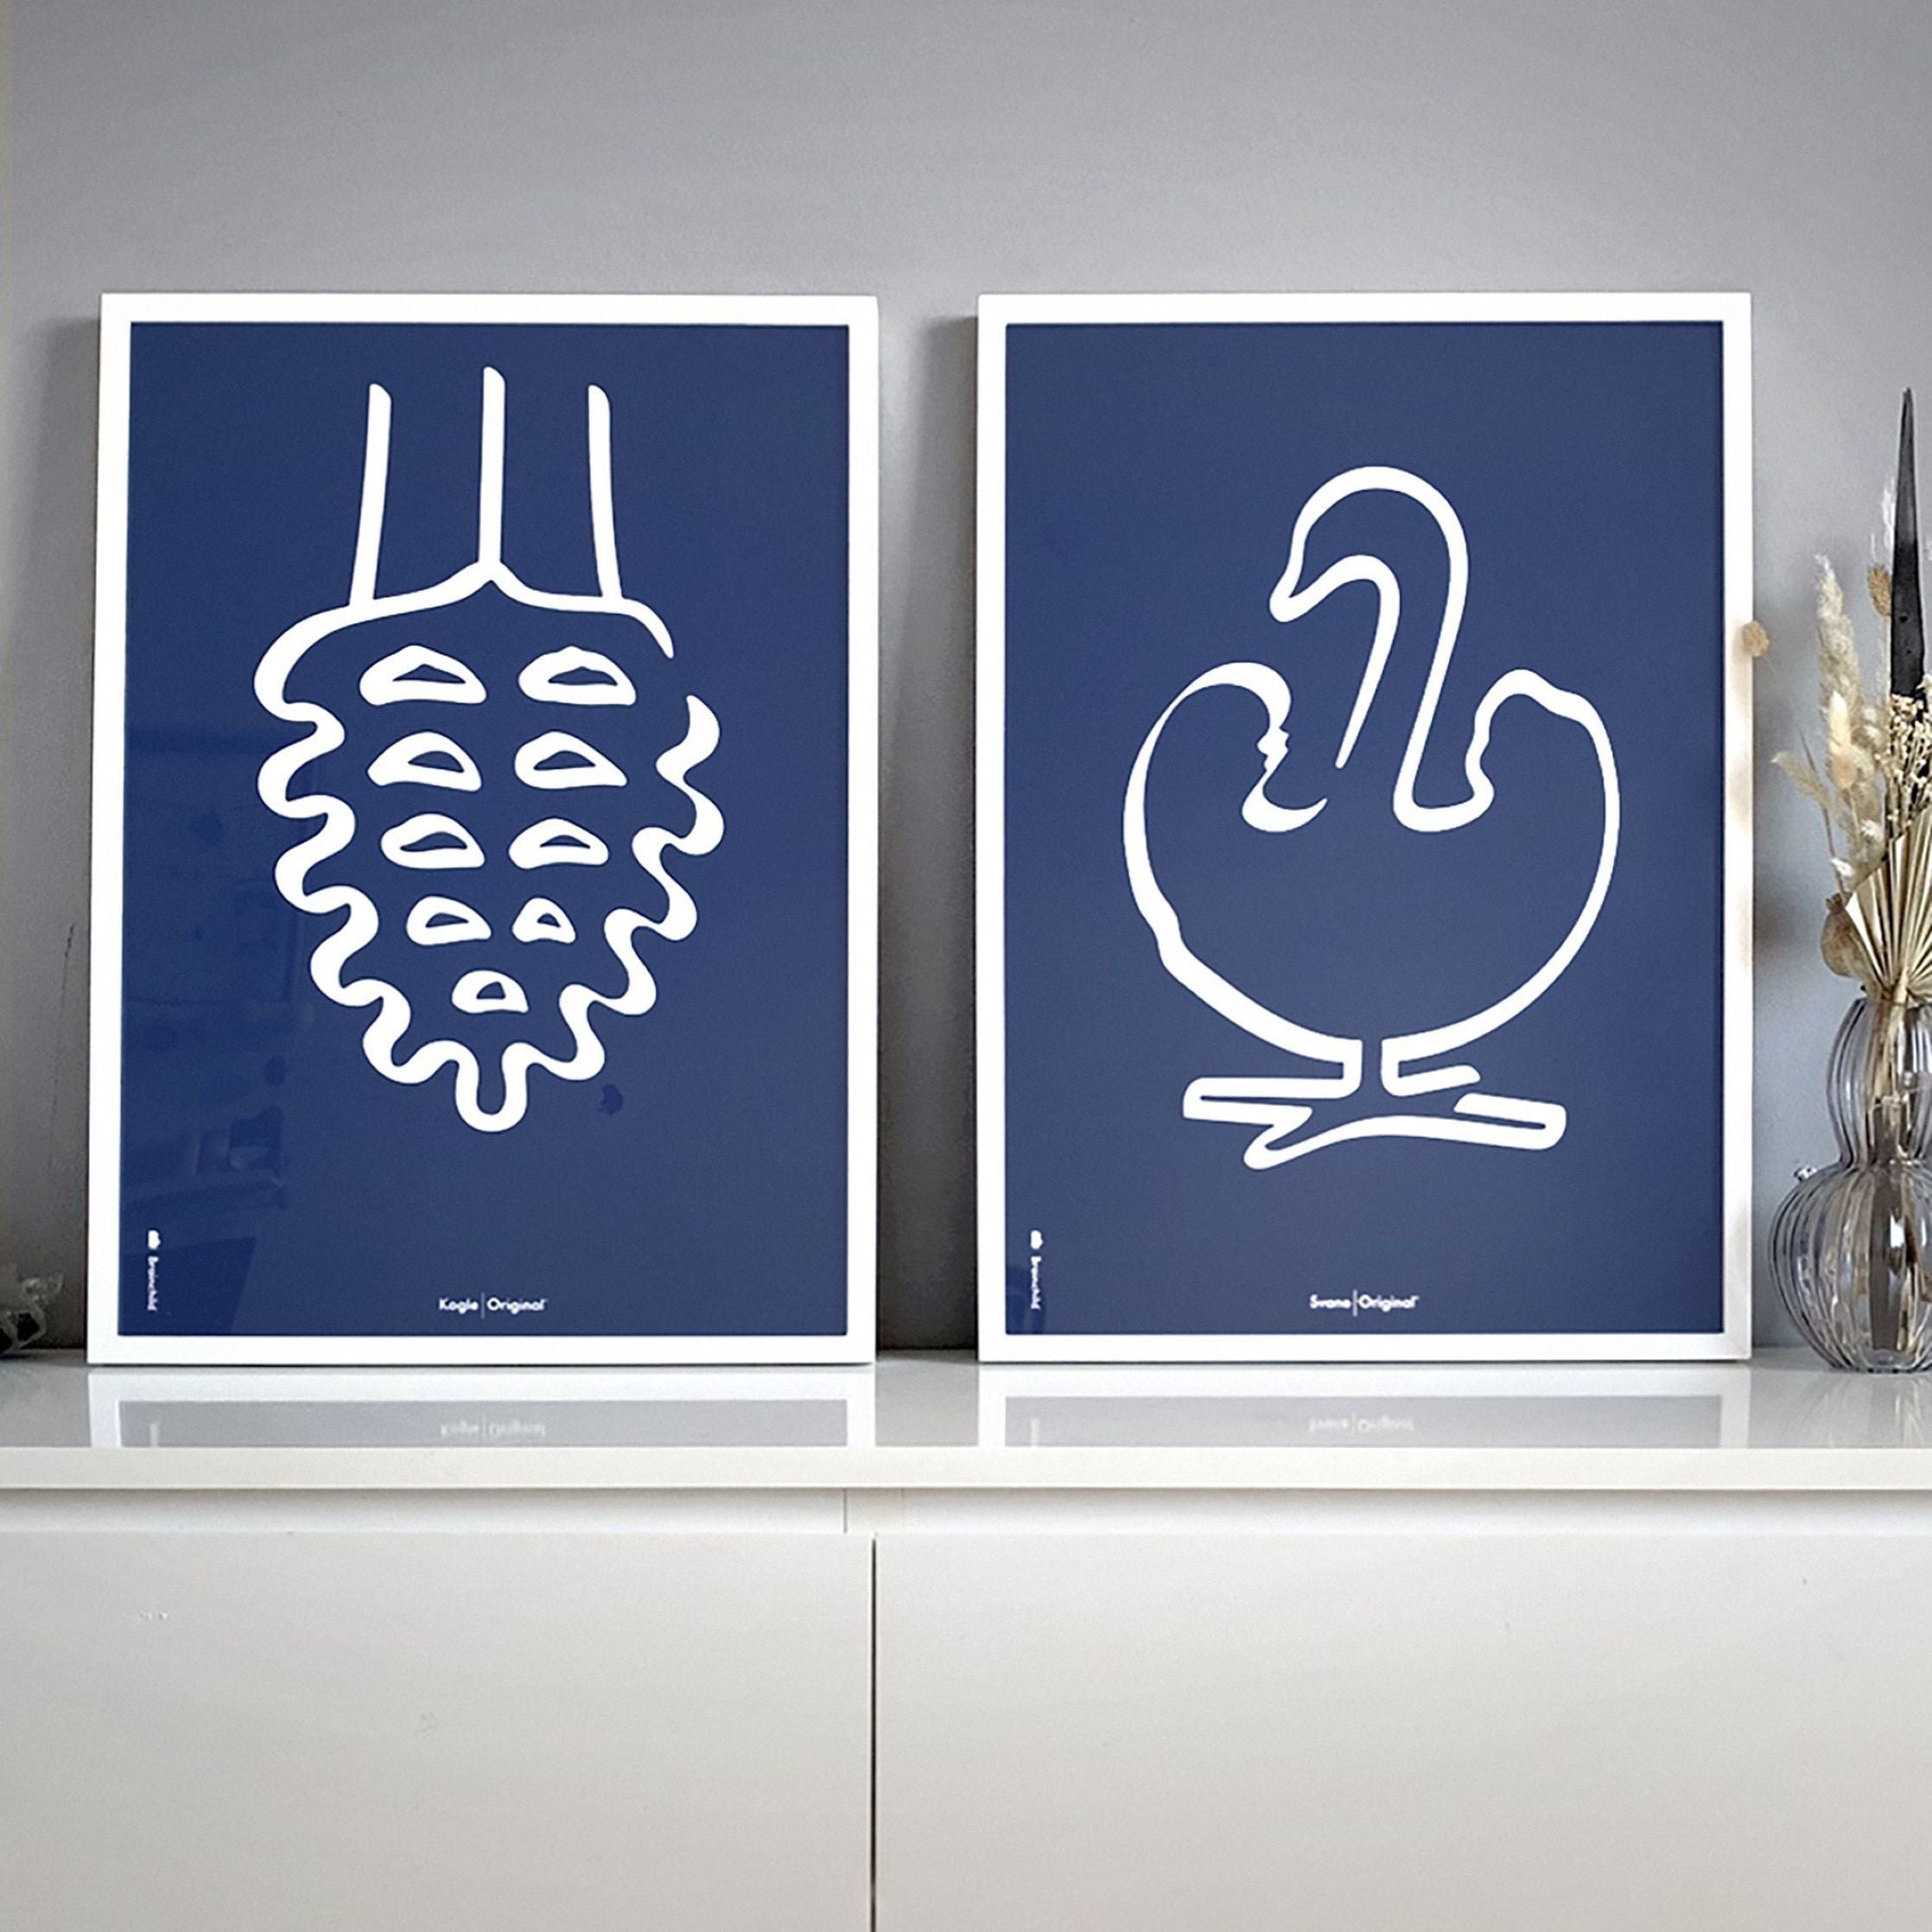 Brainchild Swan Line Poster, Frame Made Of Black Lacquered Wood 30x40 Cm, Blue Background